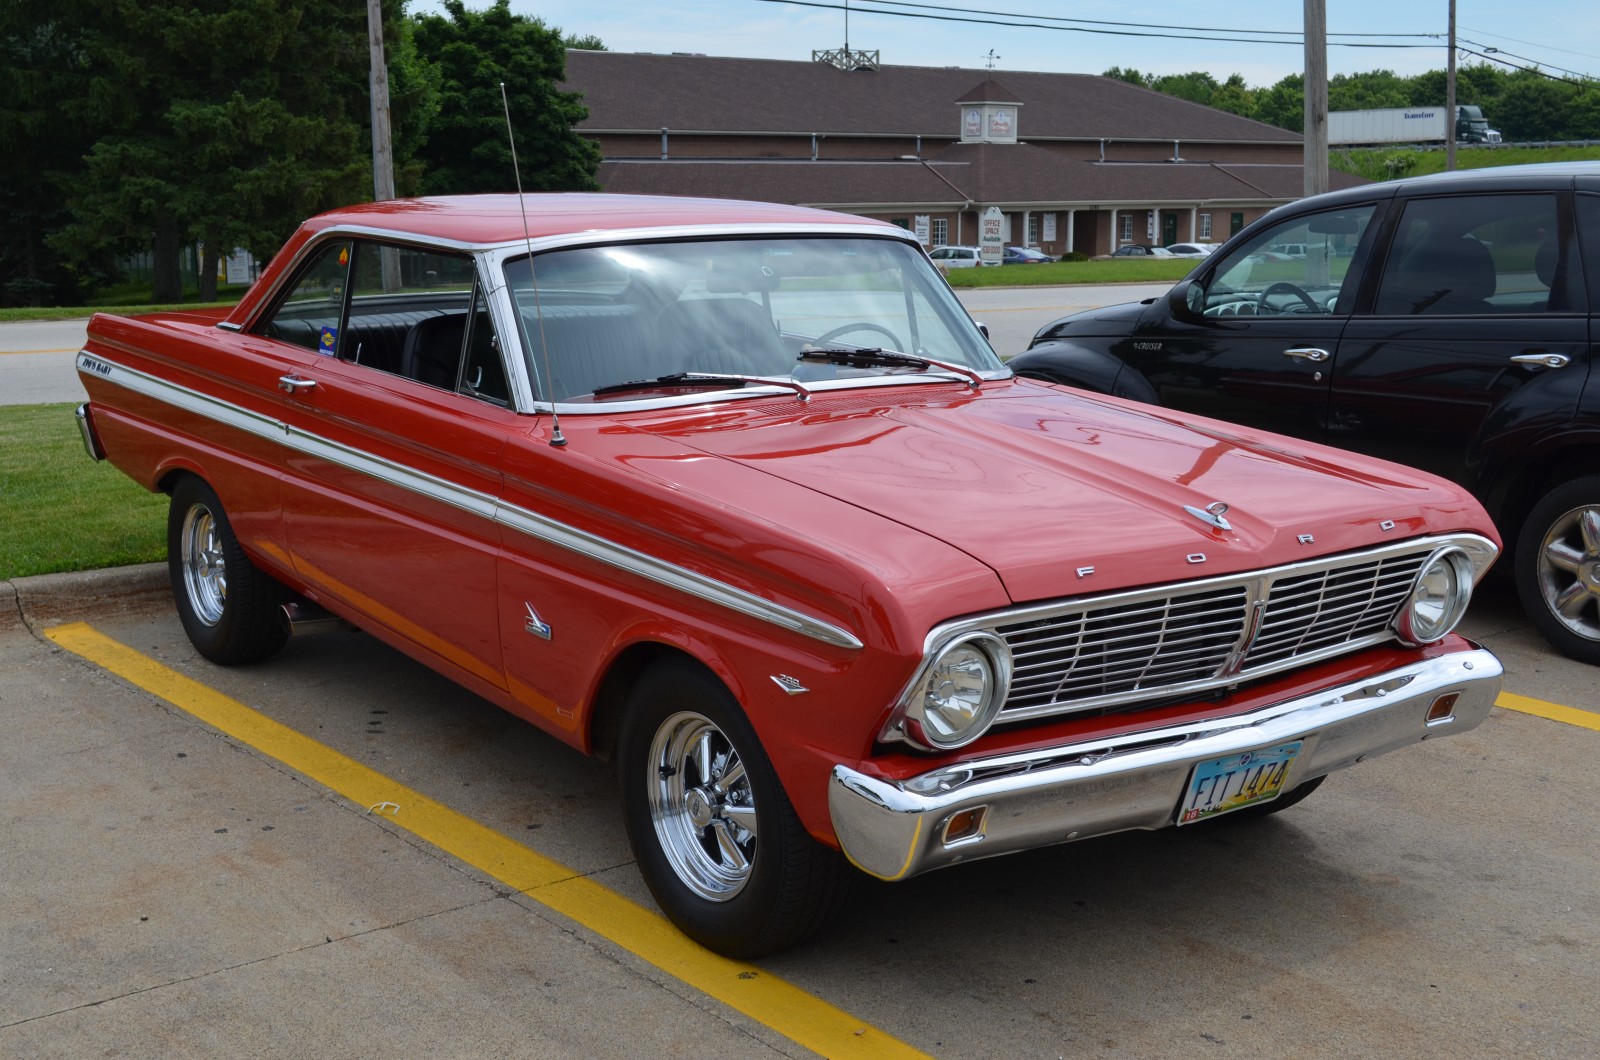 Lot Shots Find of the Week: 1965 Ford Falcon Futura - OnAllCylinders